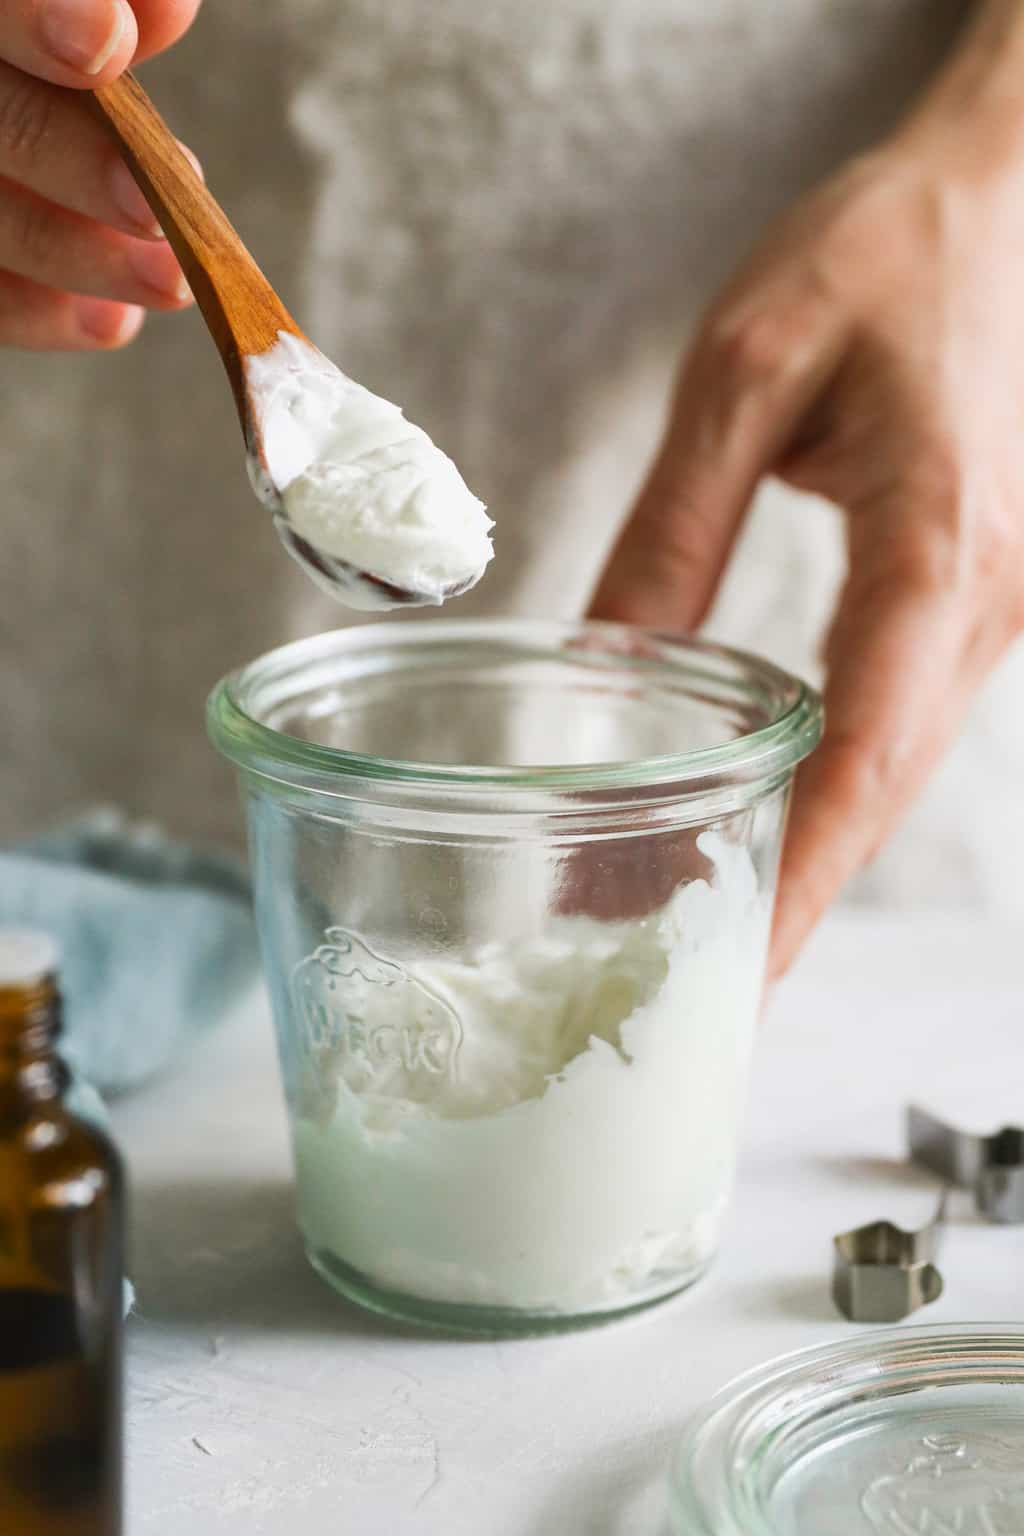 Transfer body butter to a lidded container